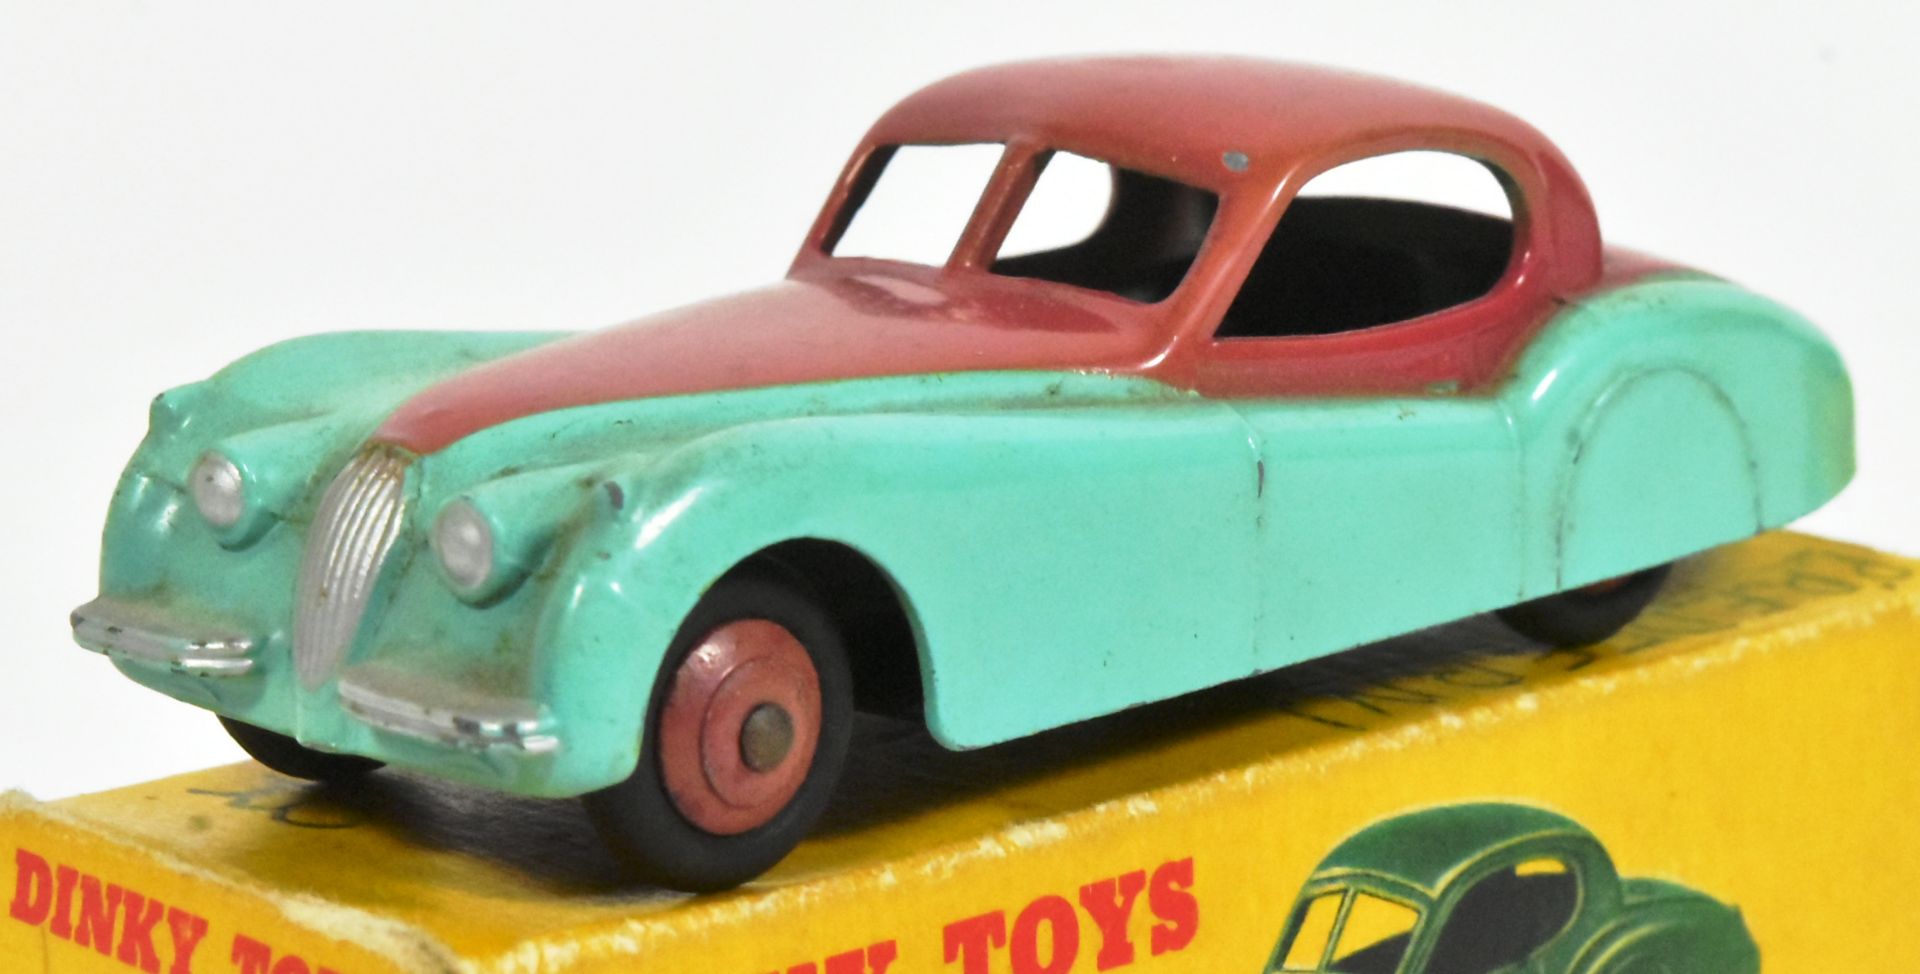 DINKY TOYS - X2 VINTAGE BOXED DINKY TOYS DIECAST MODEL CARS - Image 2 of 5